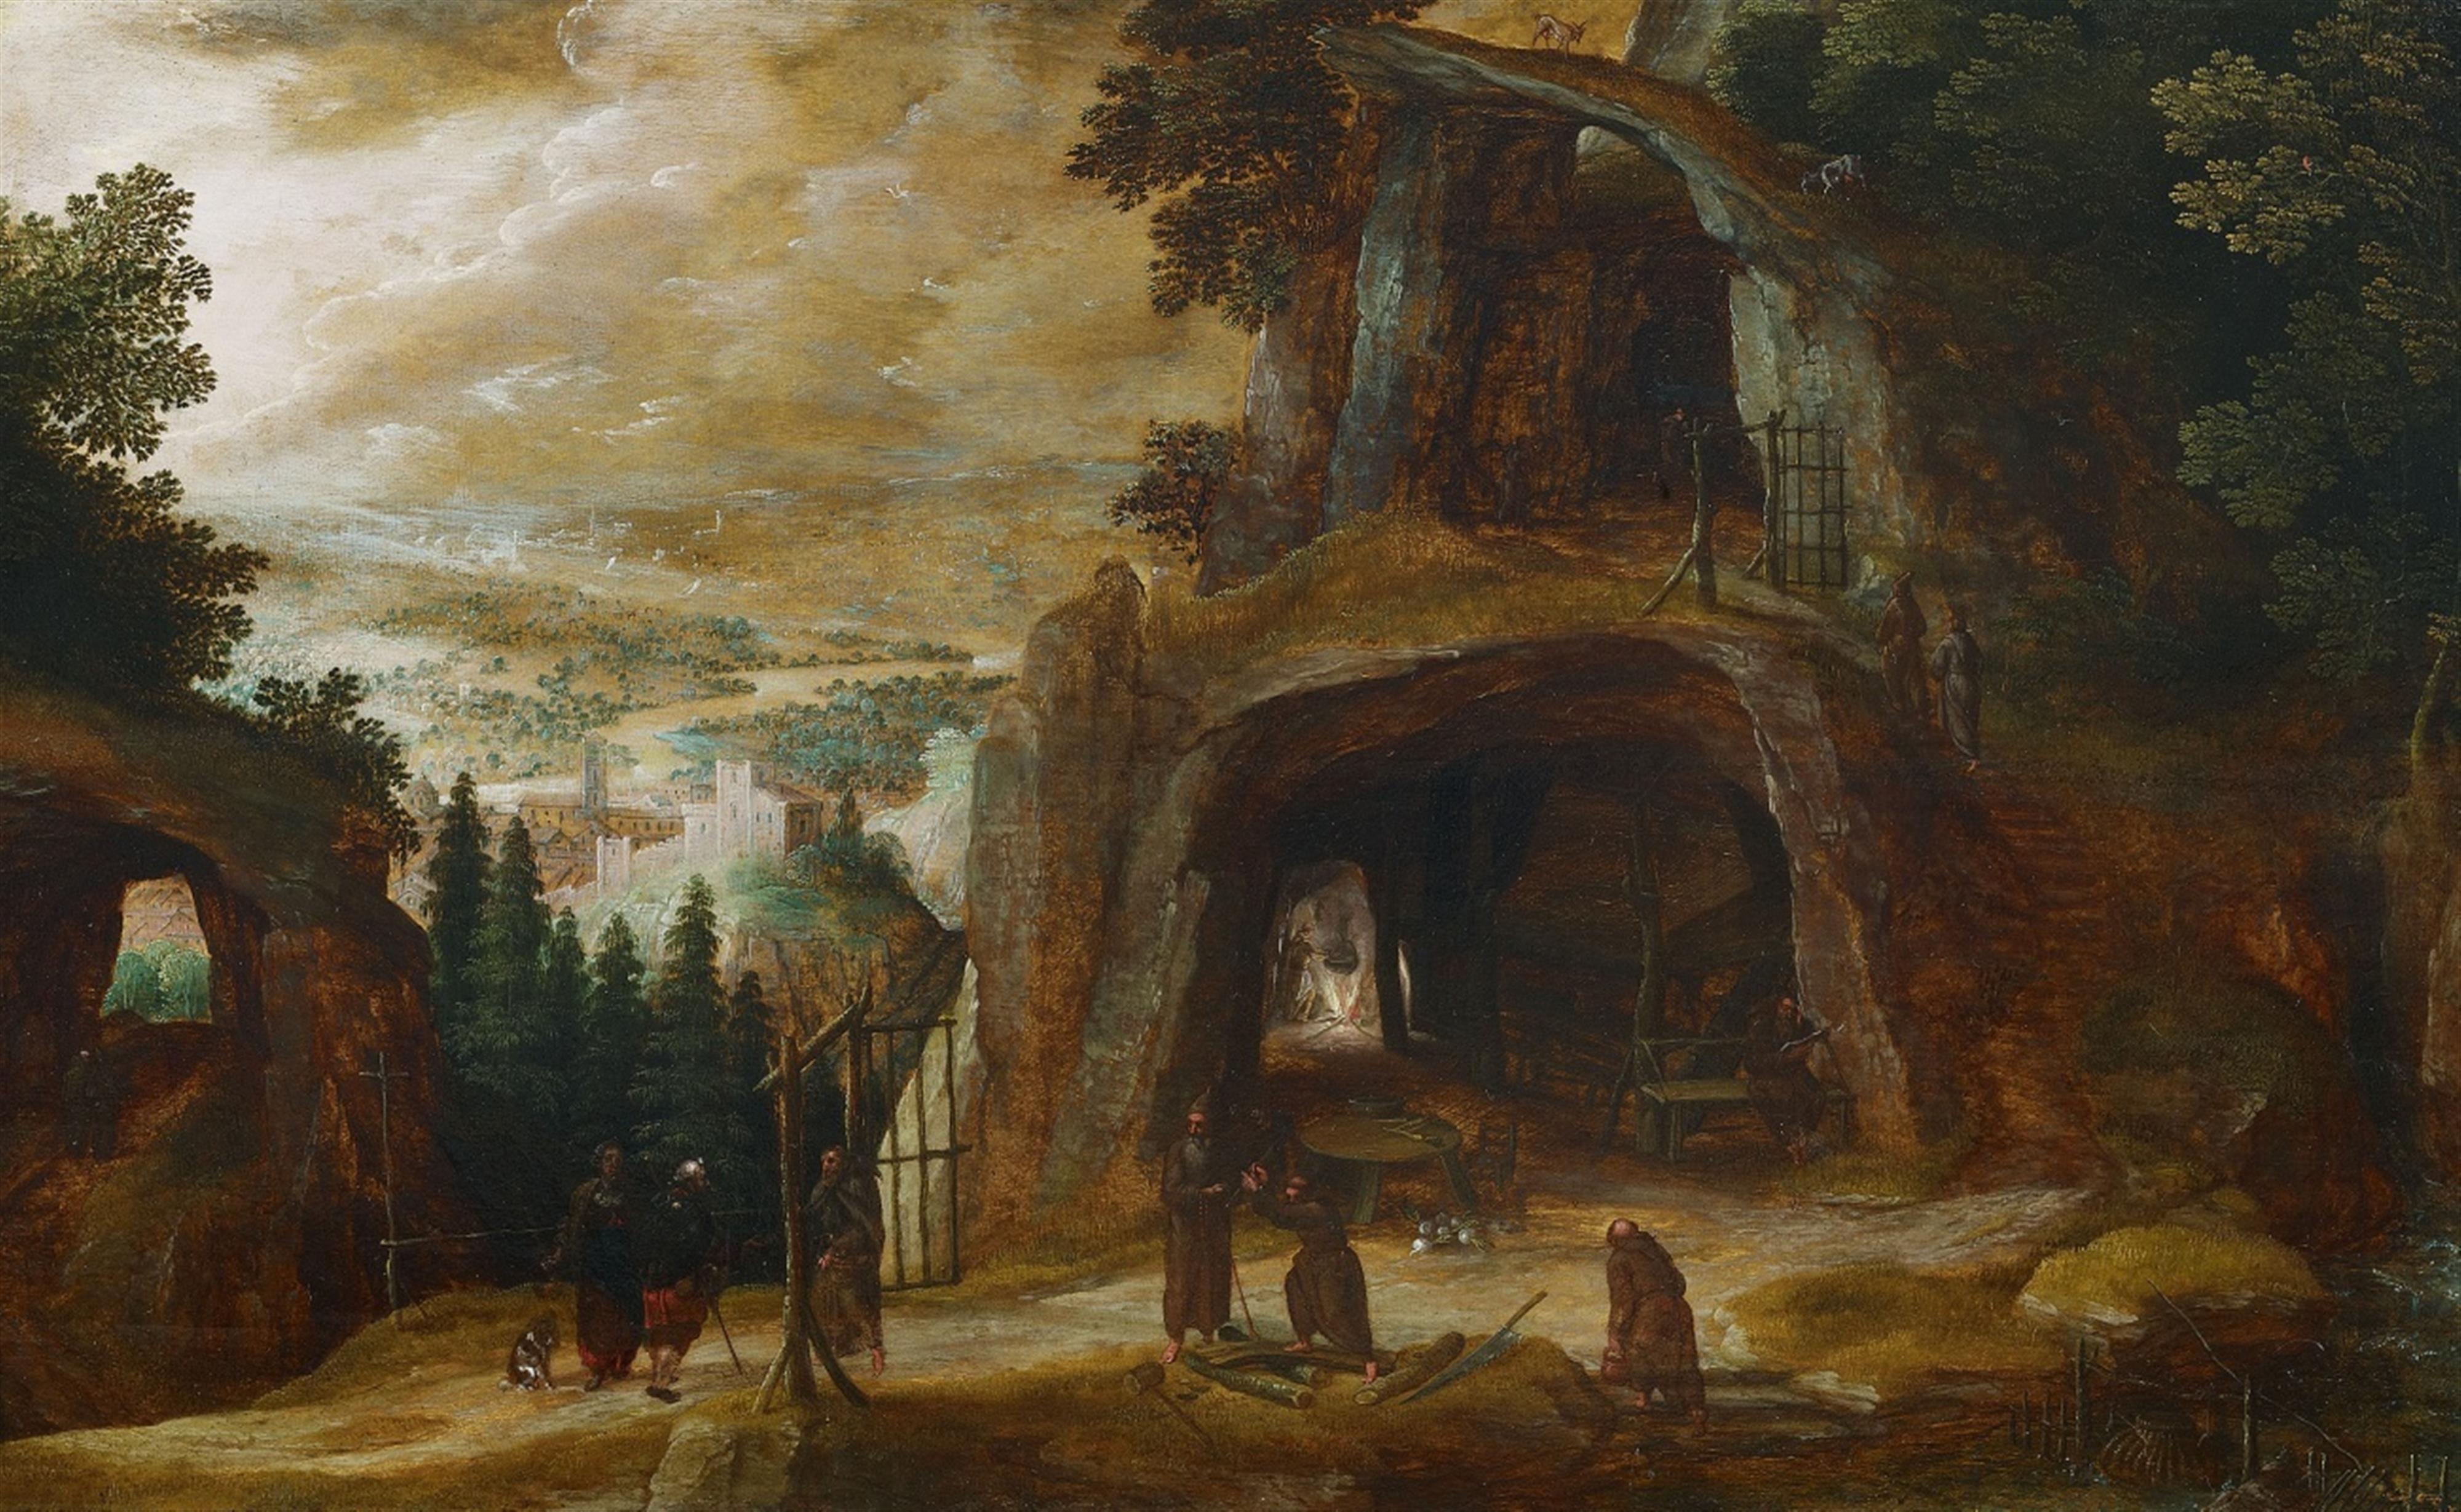 Joos de Momper - Landscape with Monks by a Grotto - image-1